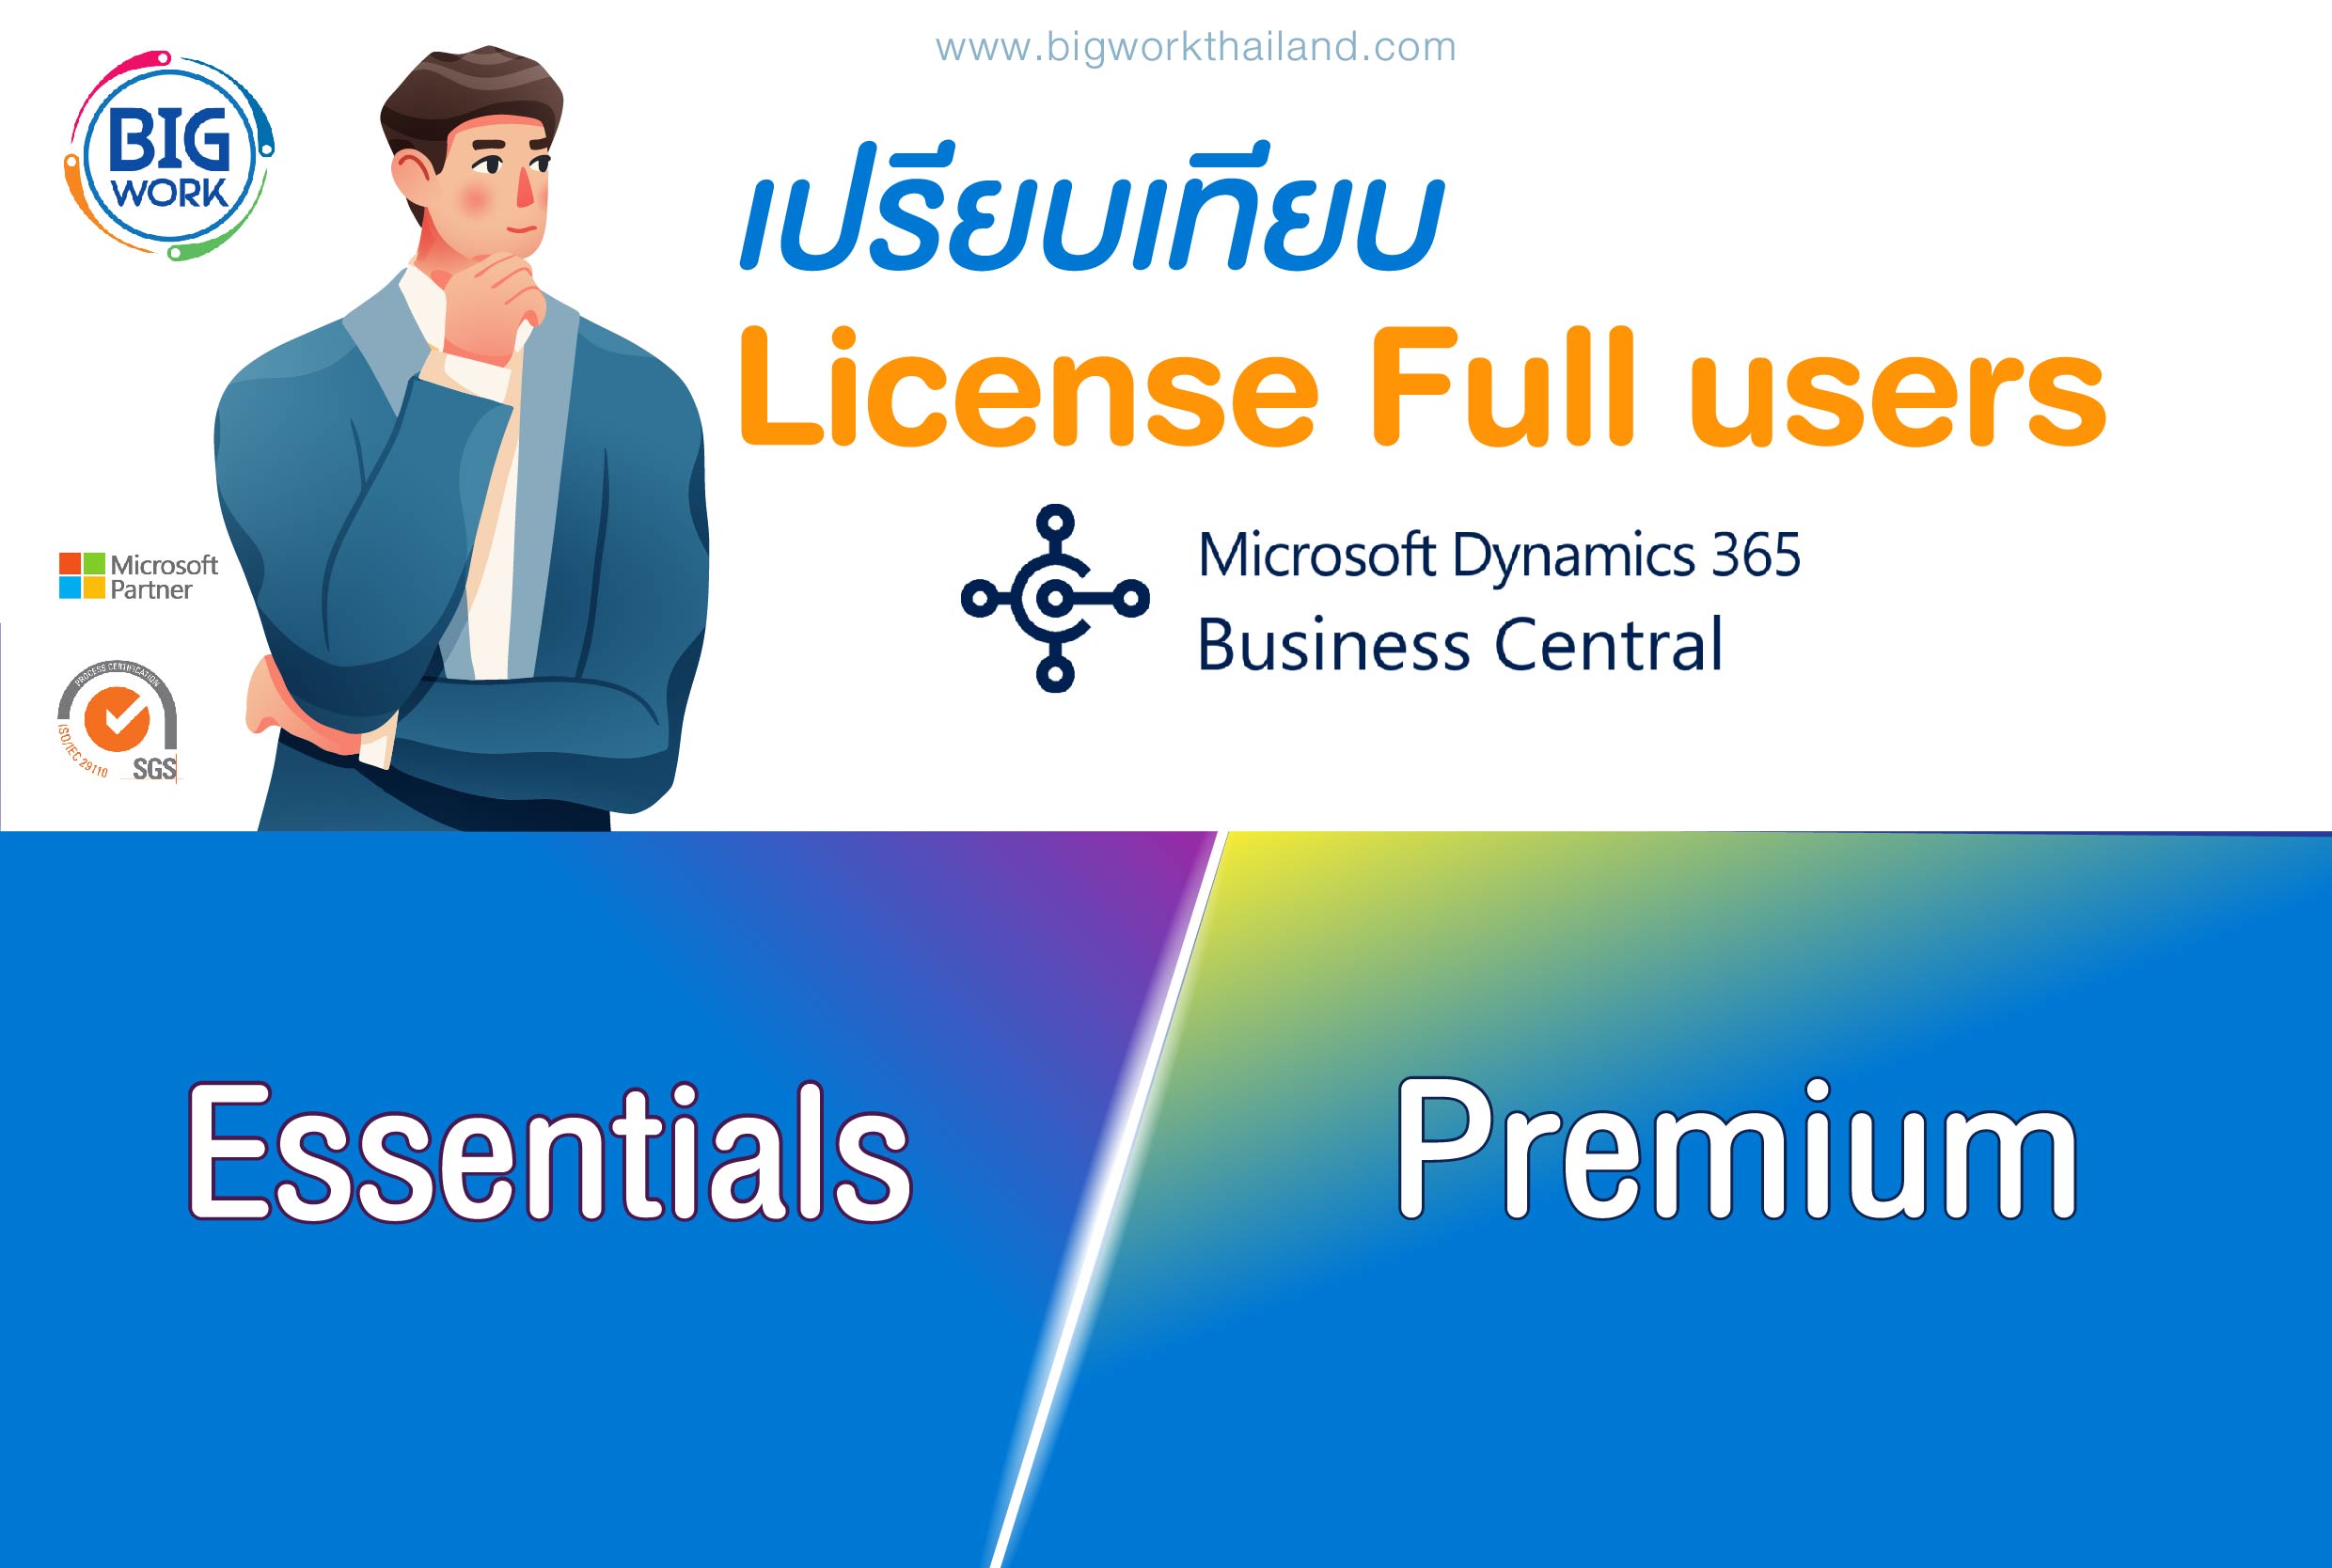 Compare License Full Users Microsoft Dynamics 365 Business Central